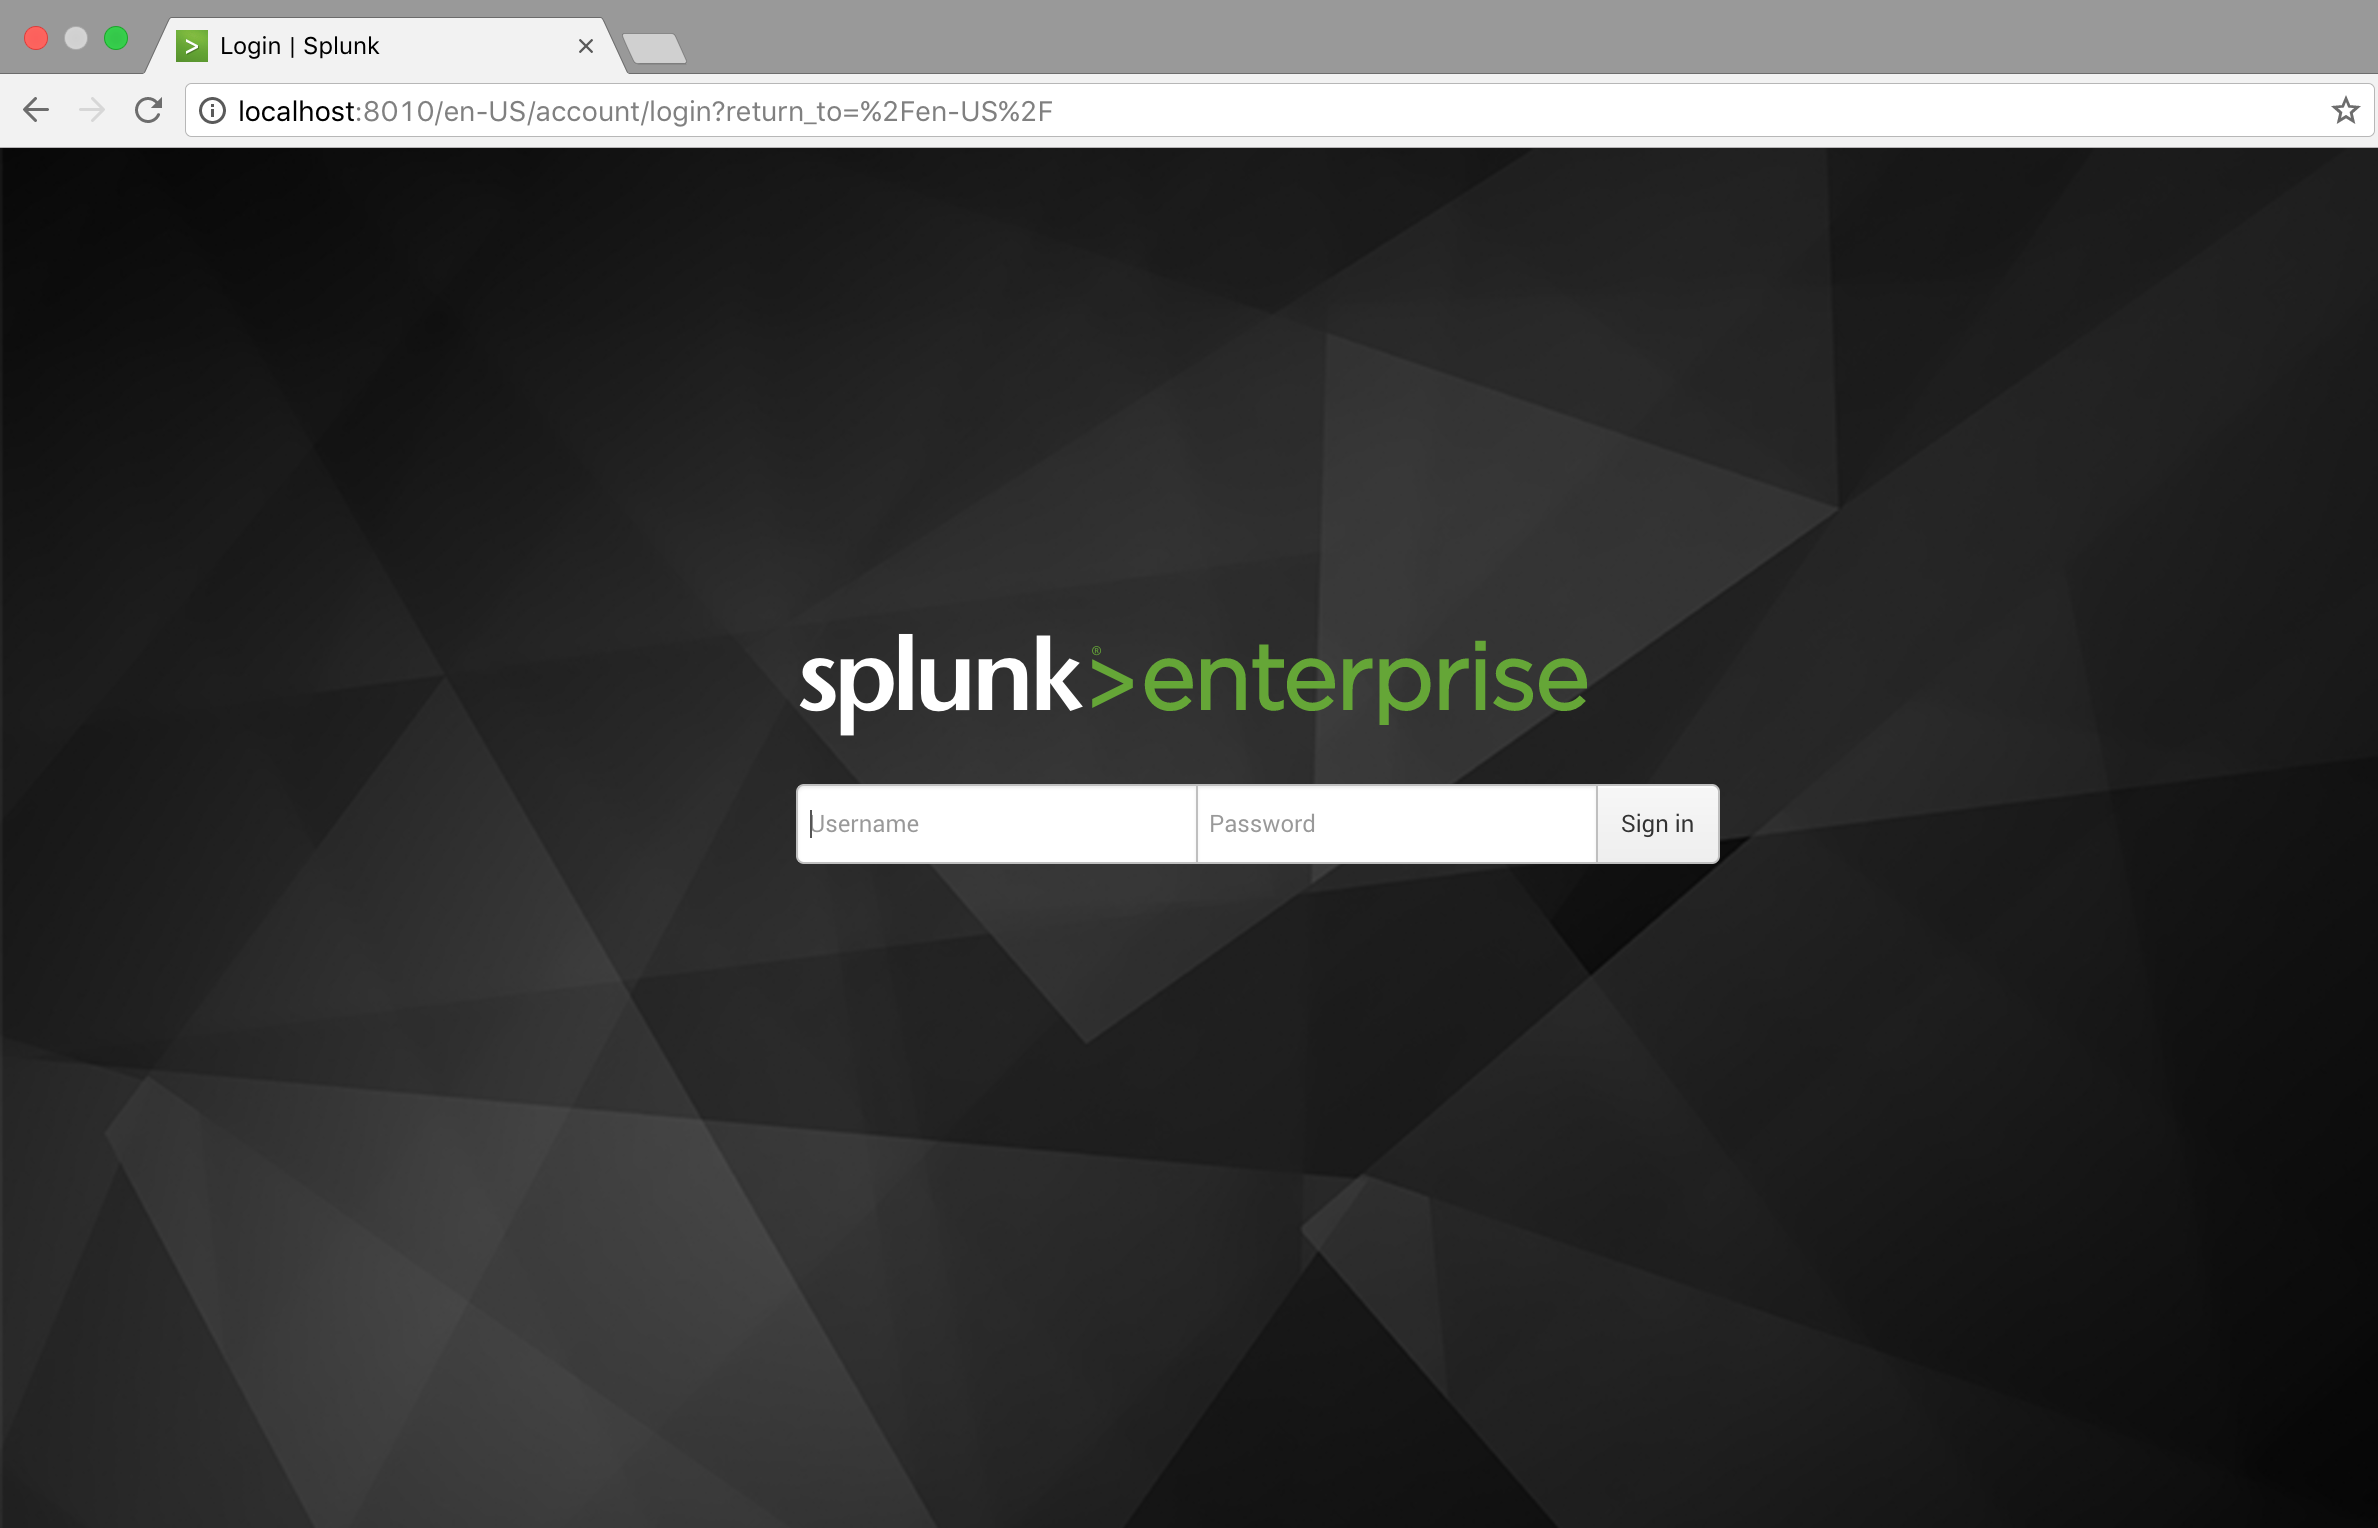 Data Scientists: Check Out Splunk Careers